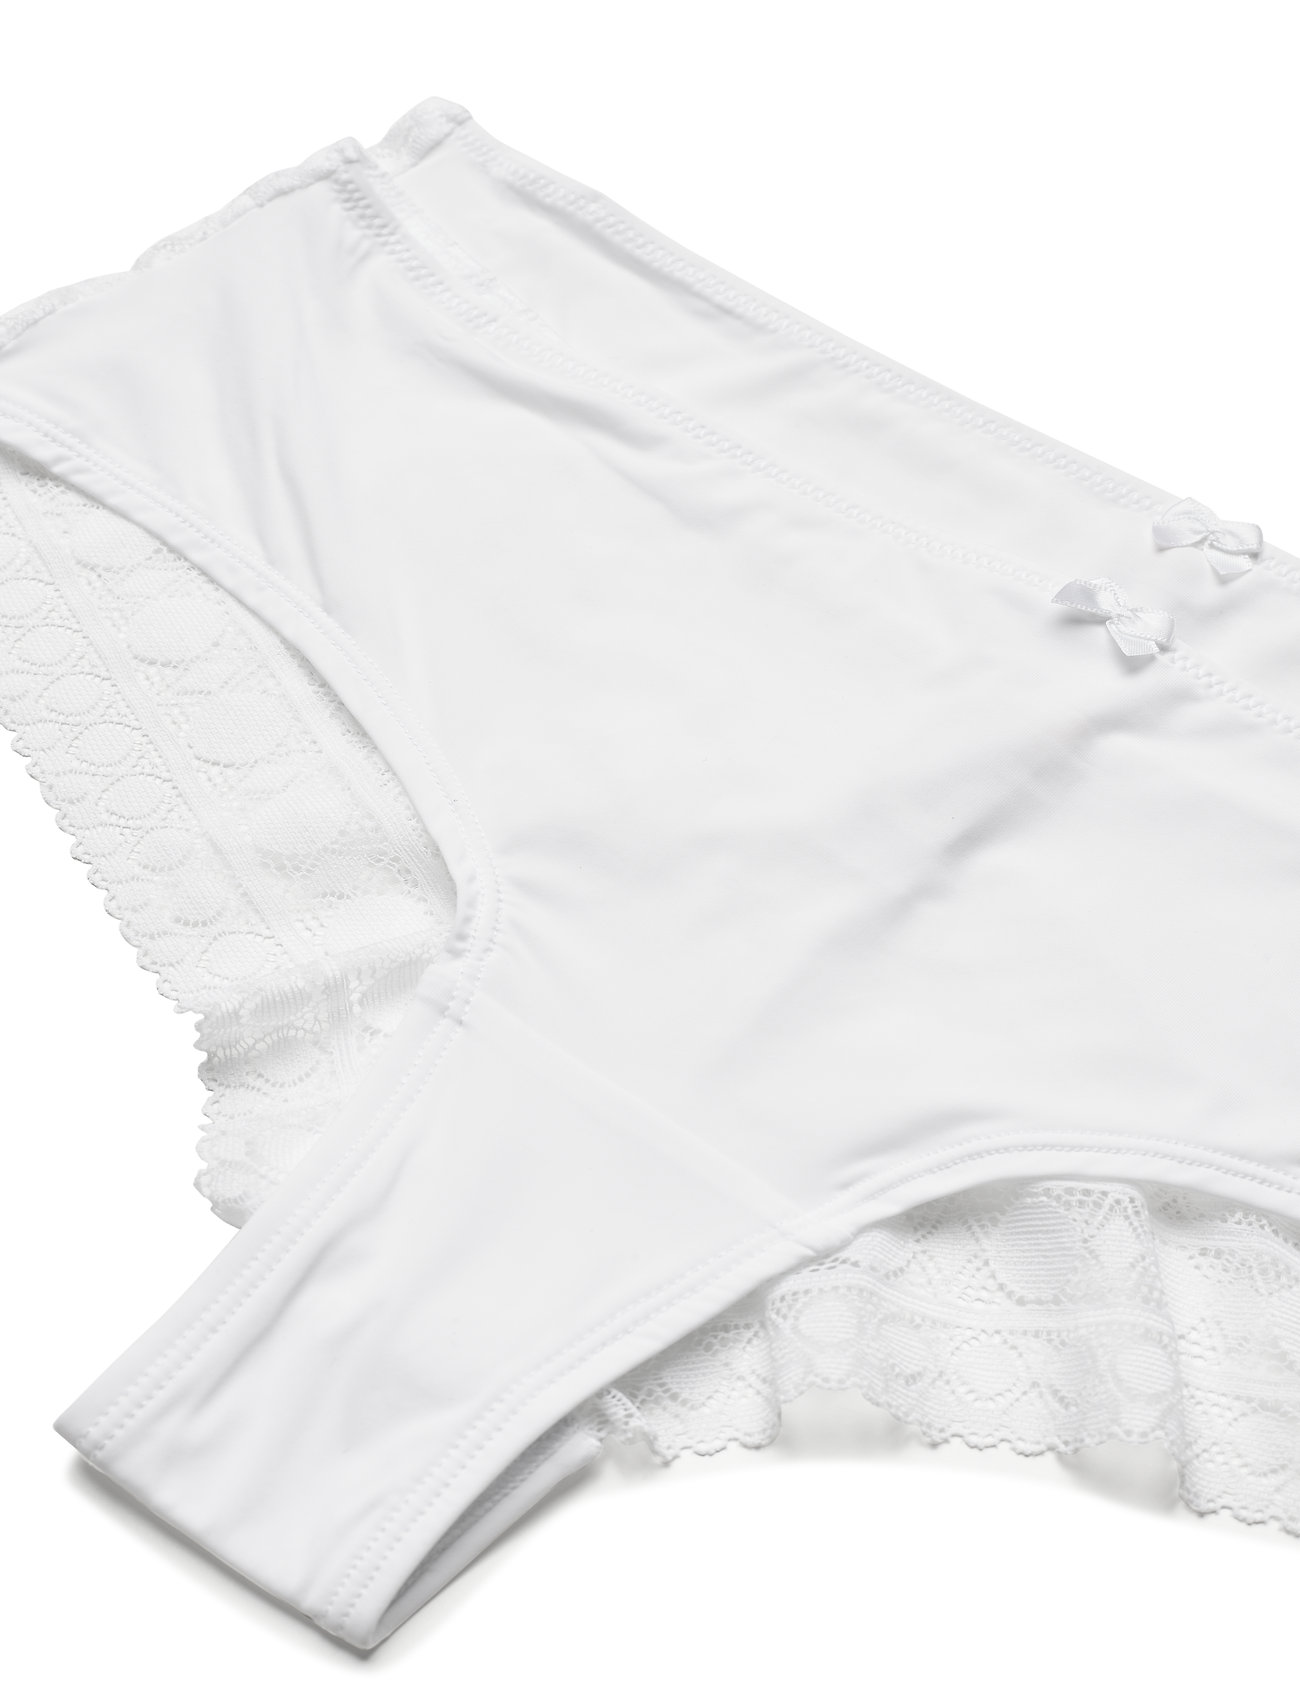 Esprit Bodywear Women - Double pack: Brazilian hipster shorts trimmed with lace - lowest prices - white - 1